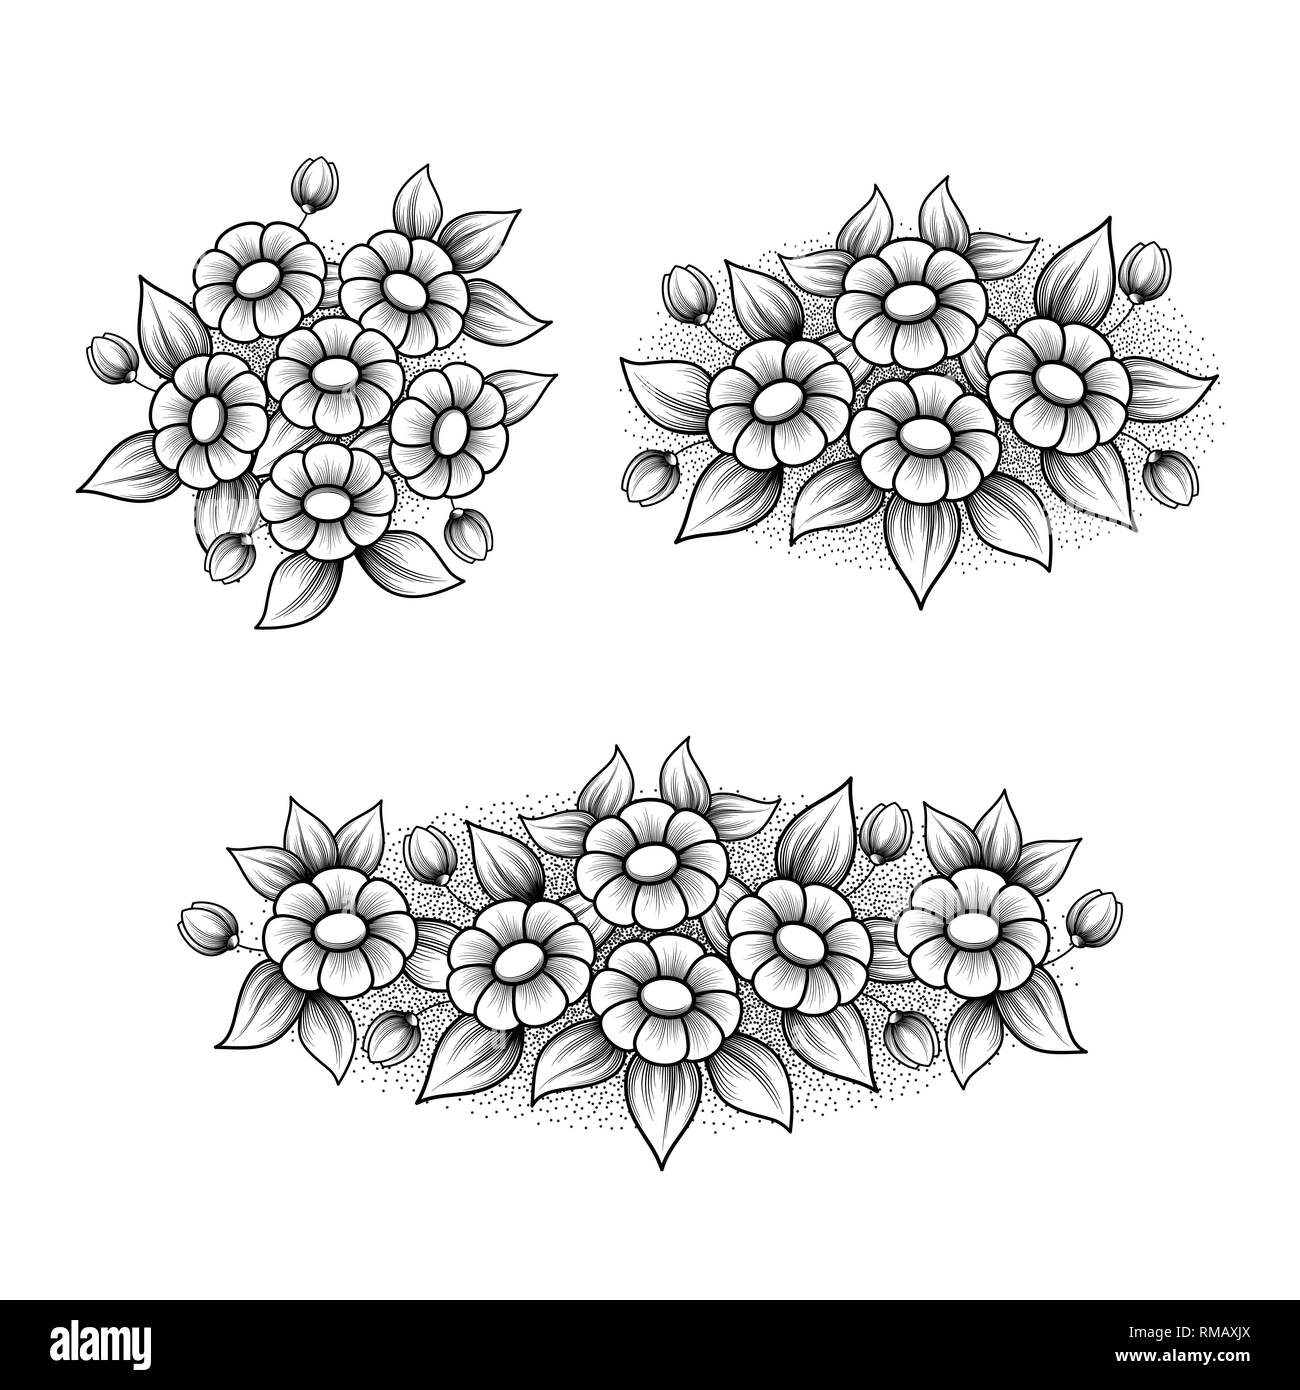 Set of three outline black and white floral patterns isolated on white background Stock Vector